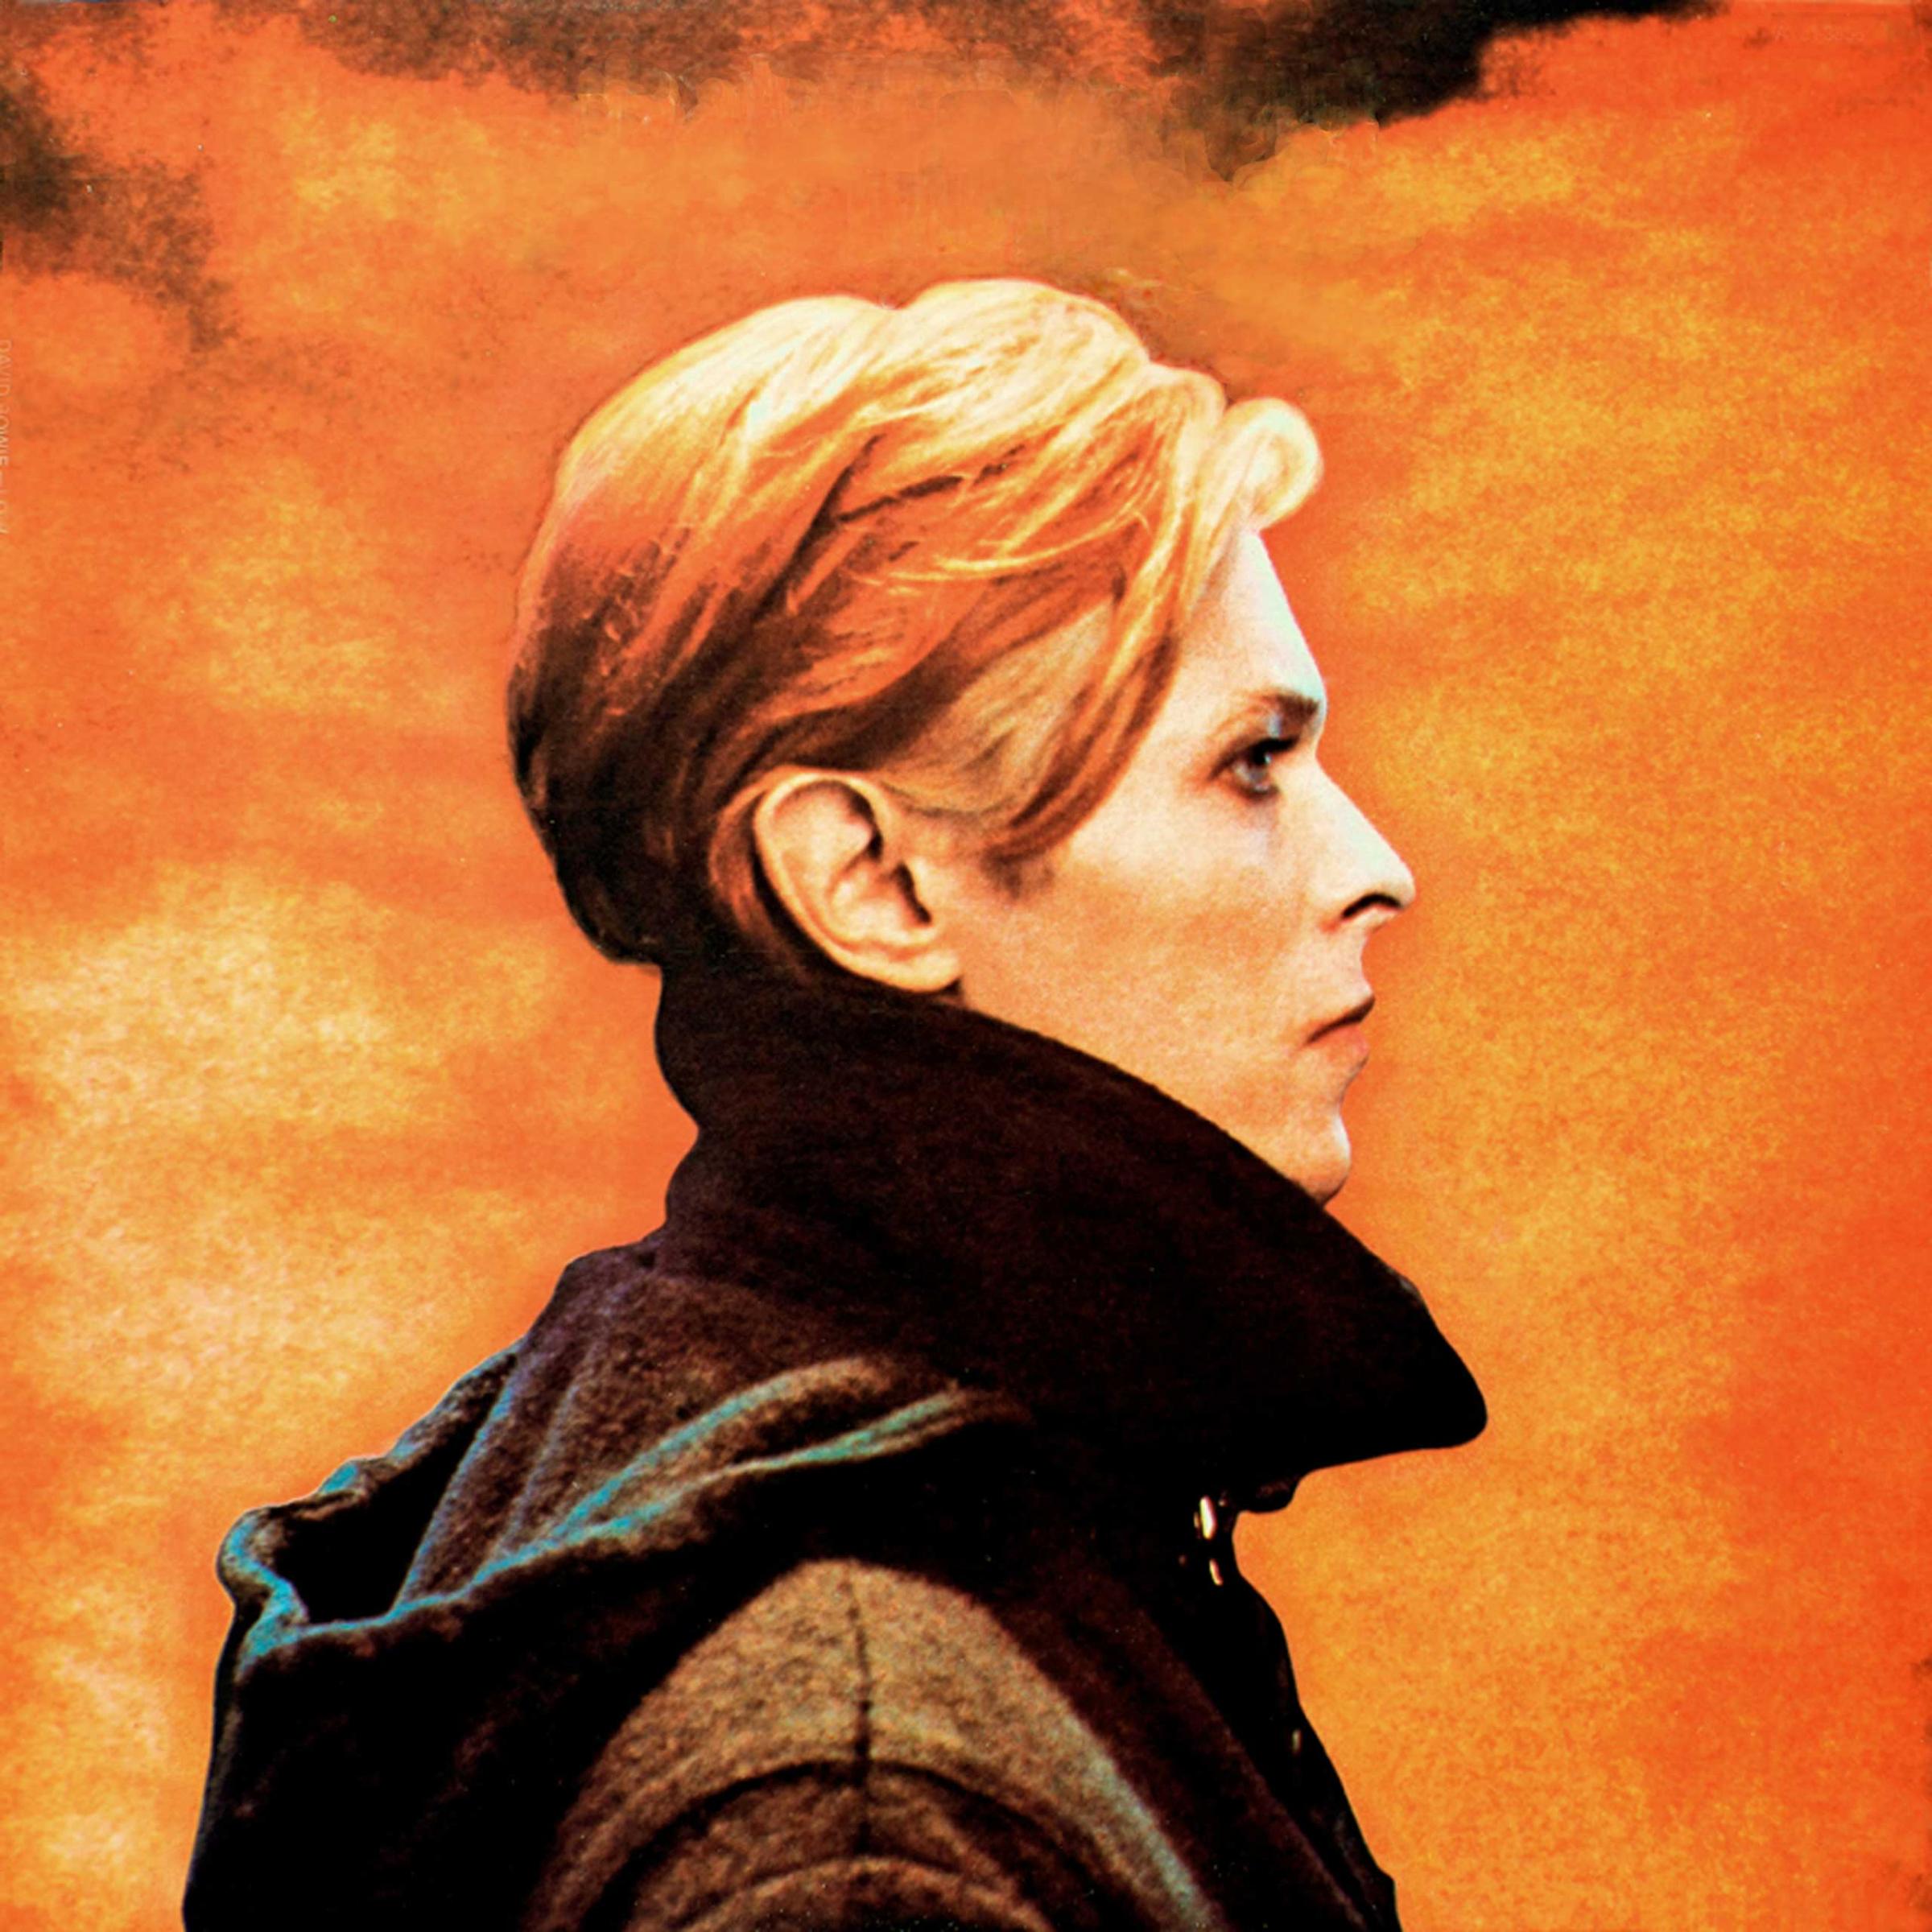 David Bowie , 1975, while making the film “The Man Who Fell to Earth (1976). The picture is the album cover for LOW (1977).credit: Steve Schapiro—Corbis